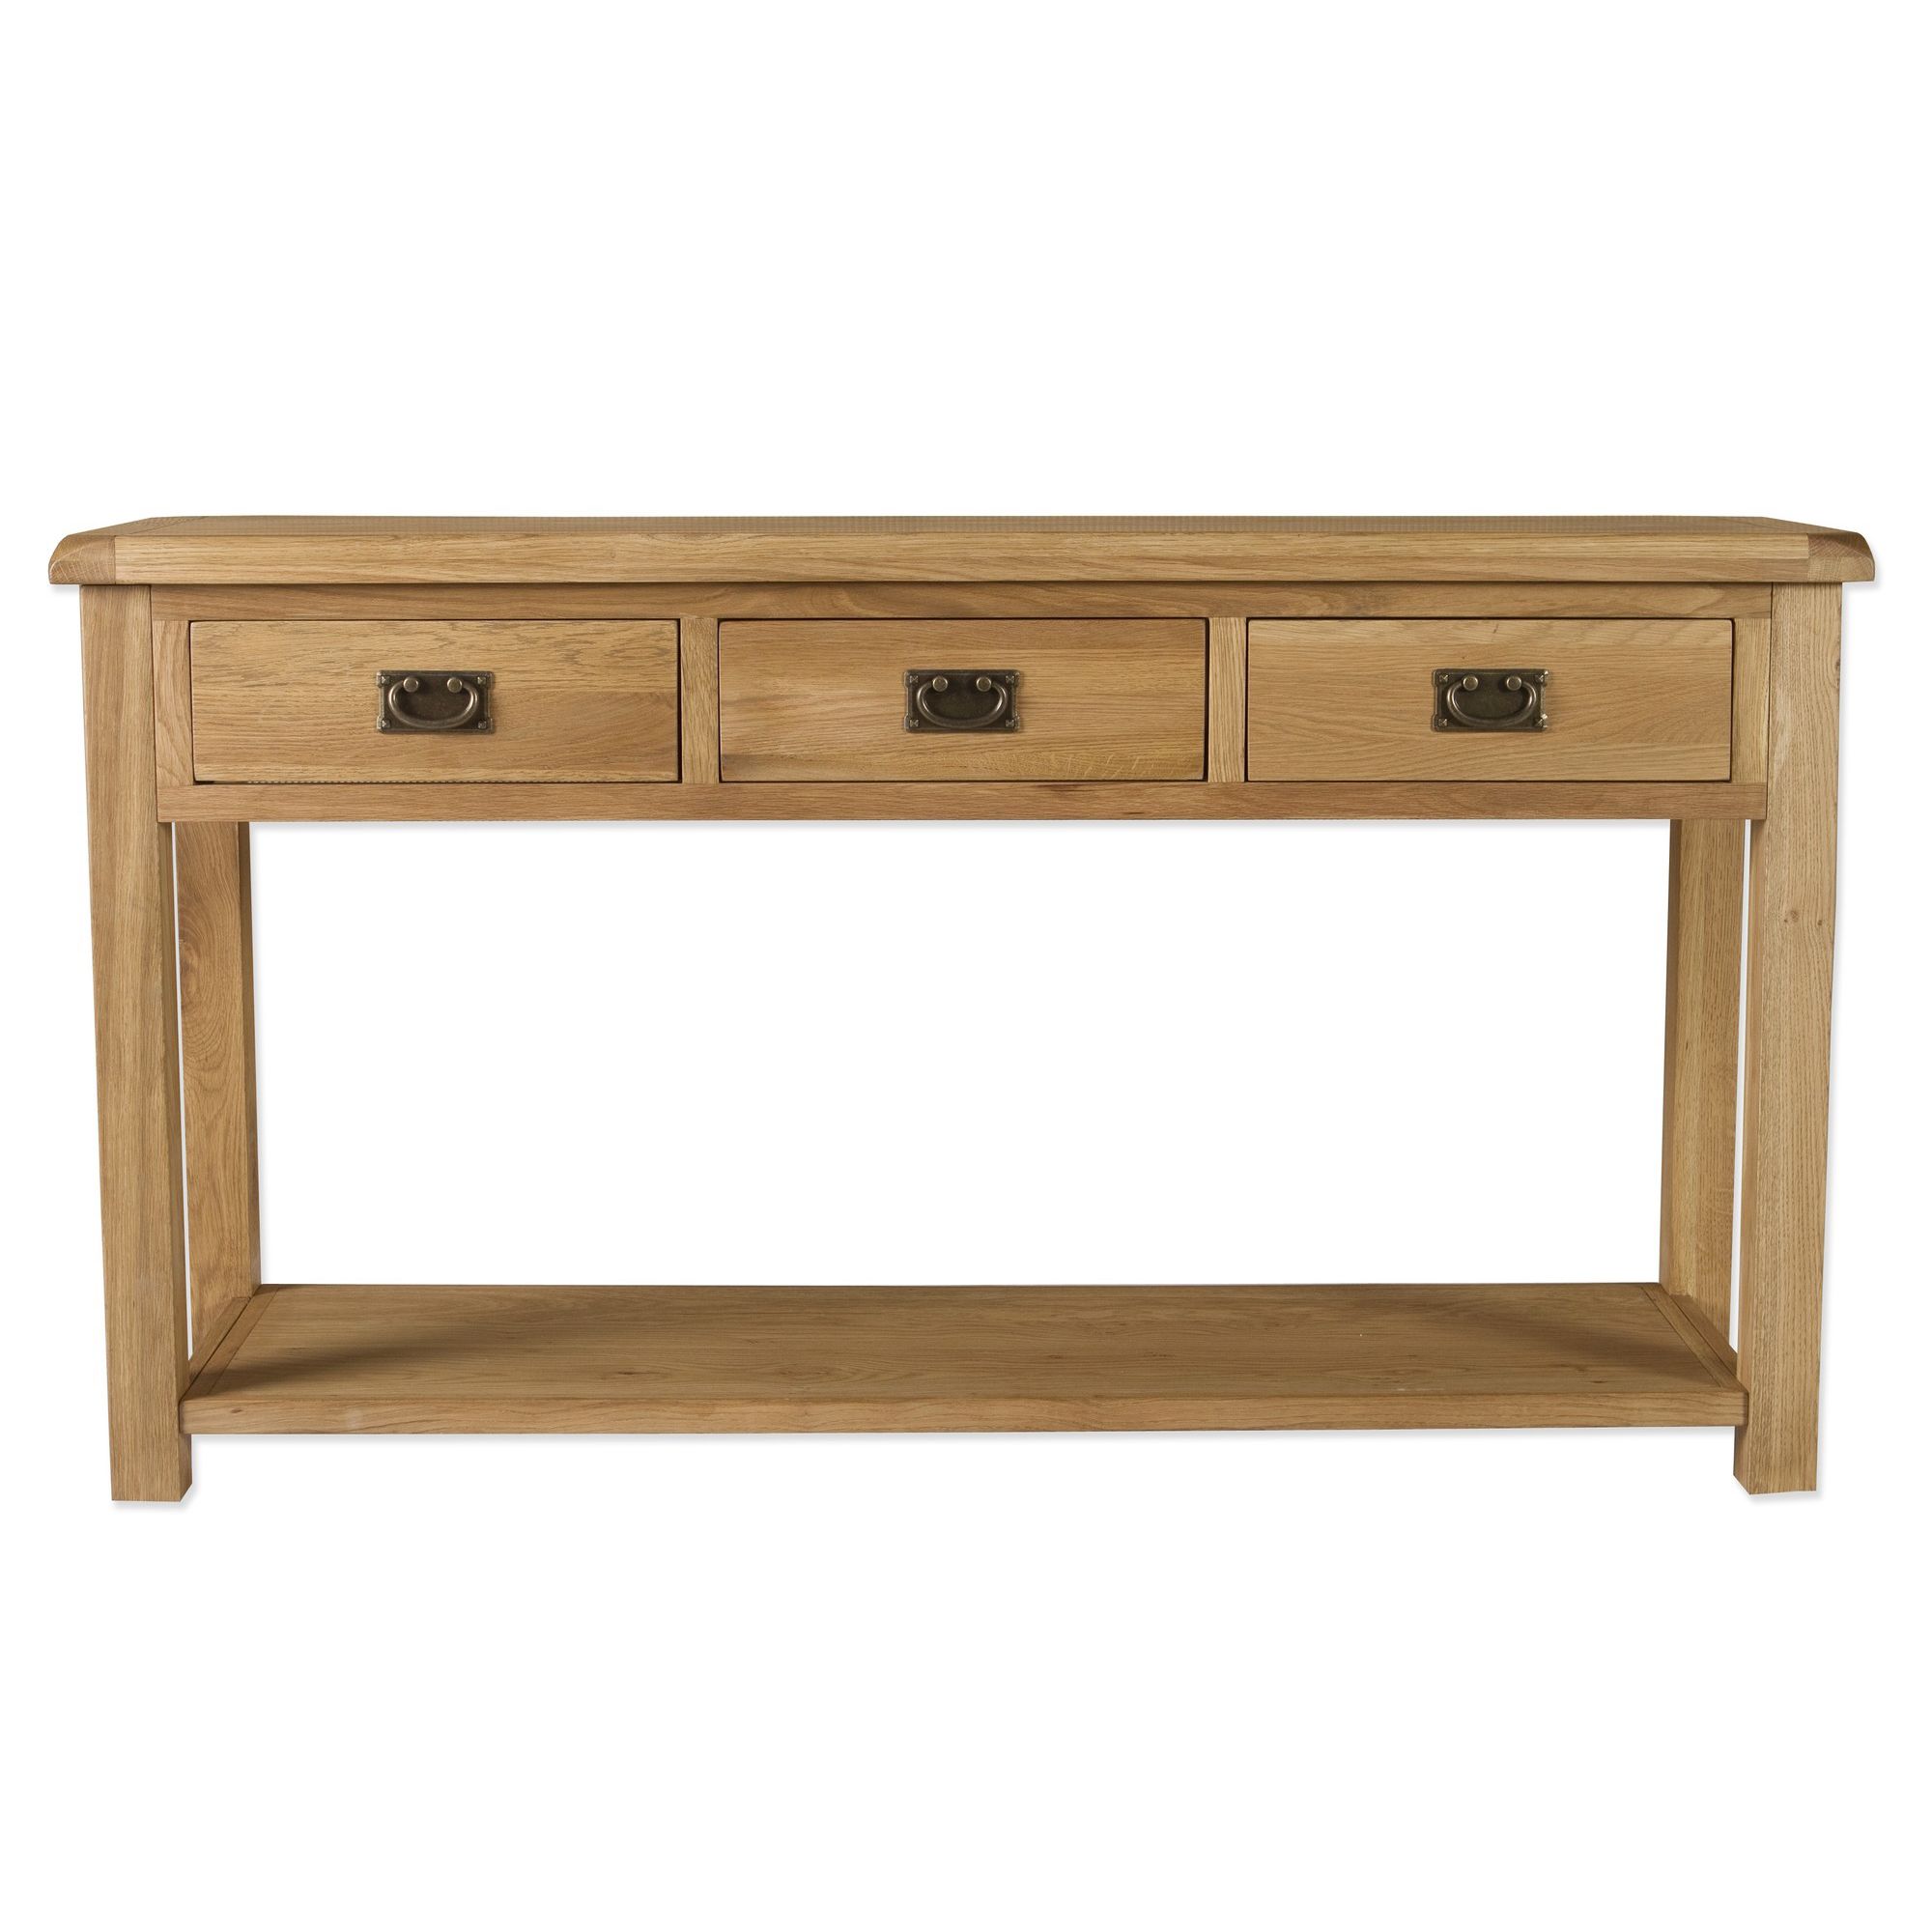 Elements Woodville Three Drawer Console Table at Tesco Direct